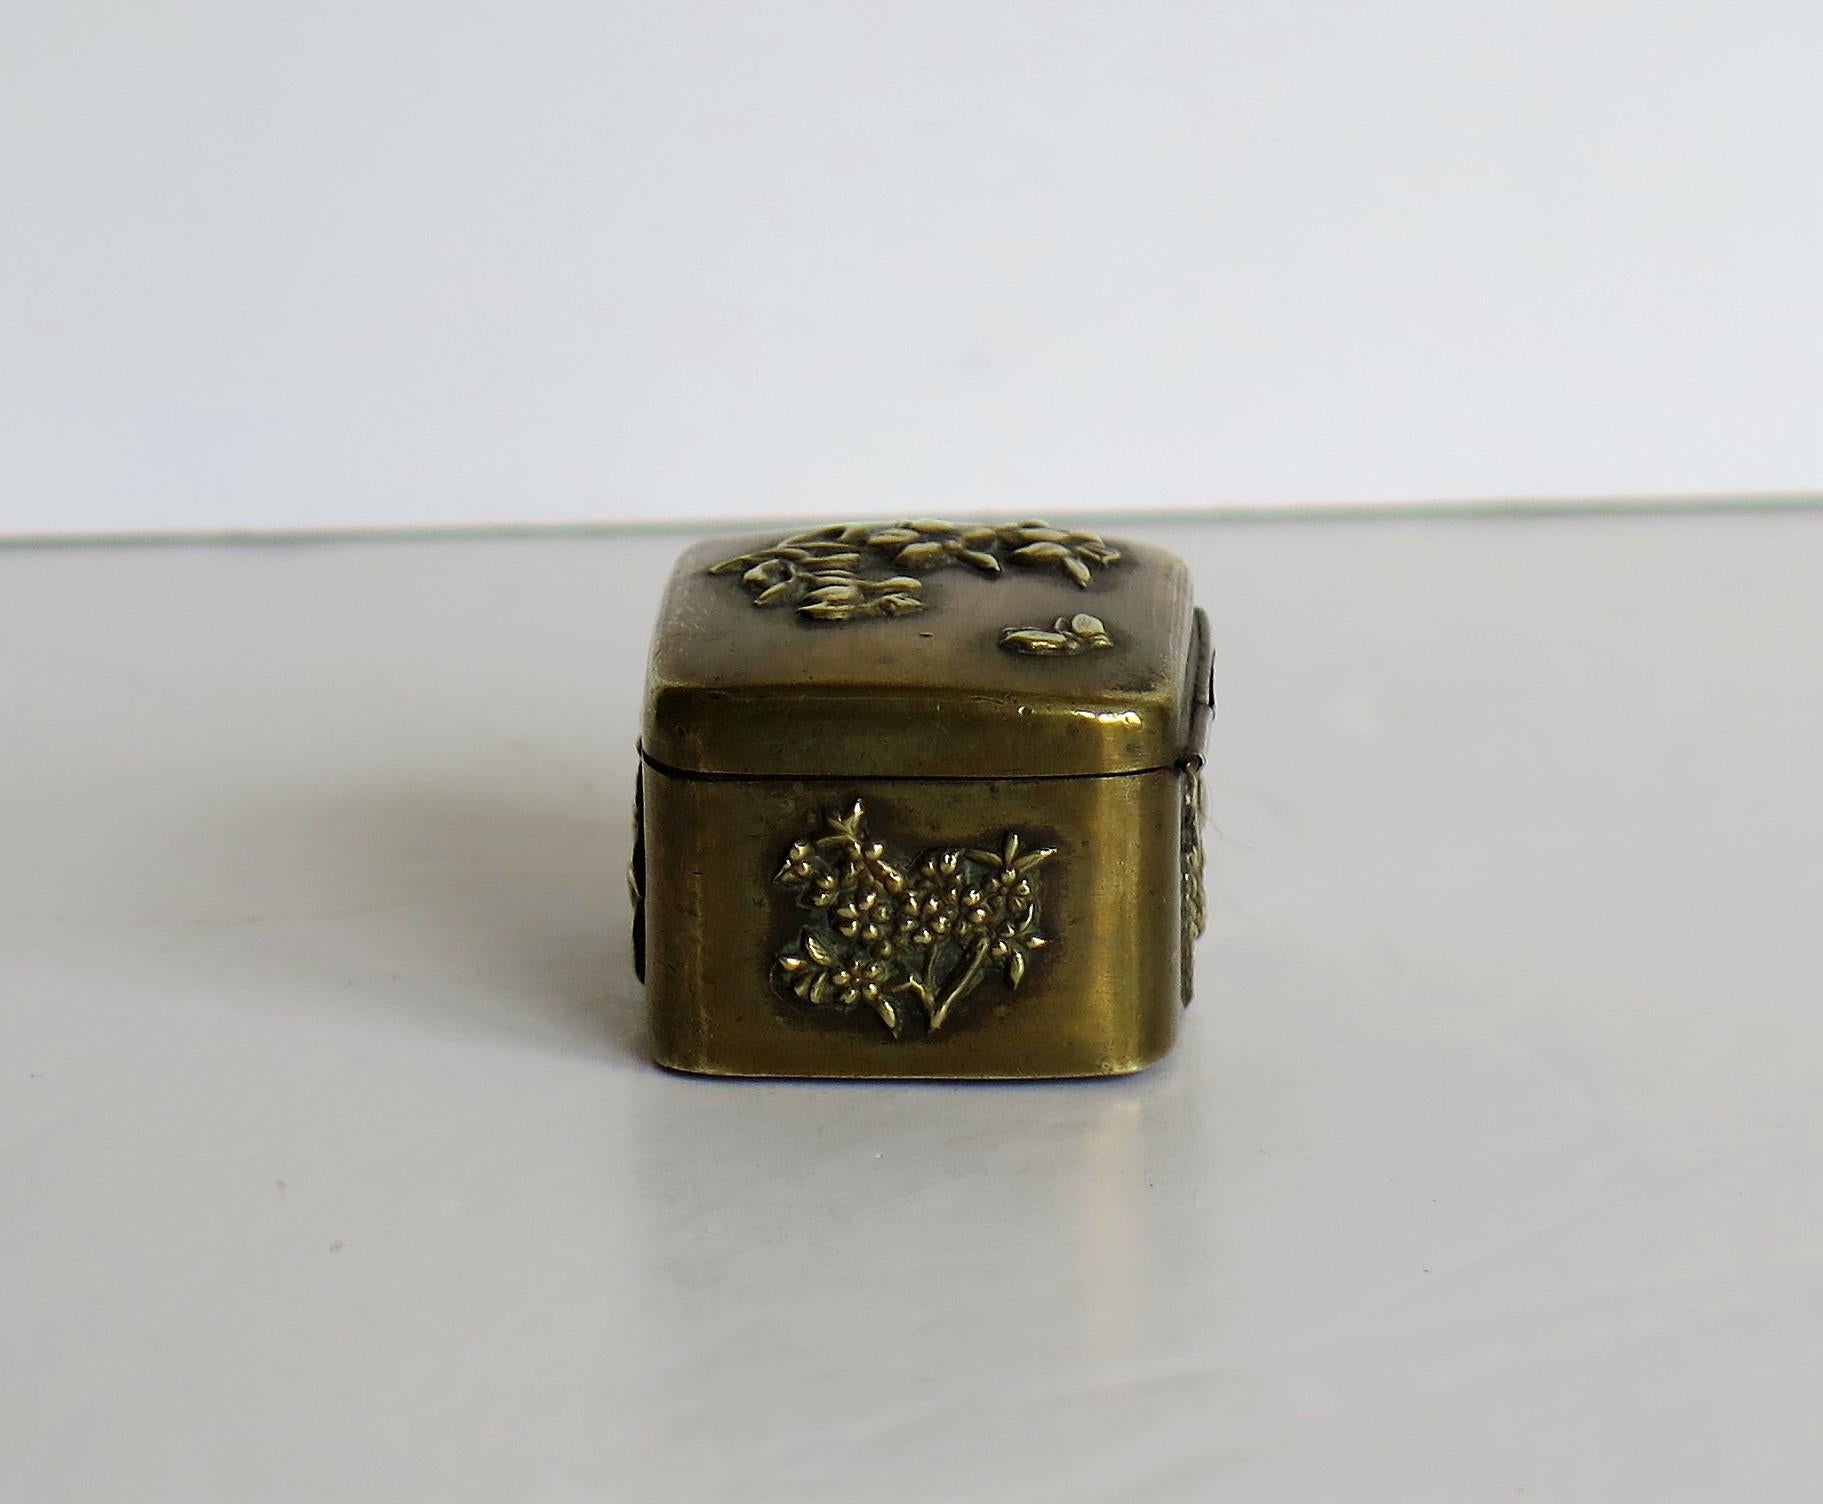 Hand-Crafted Small Japanese bronze and brass embossed Box with hinged lid 19th C Meiji Period